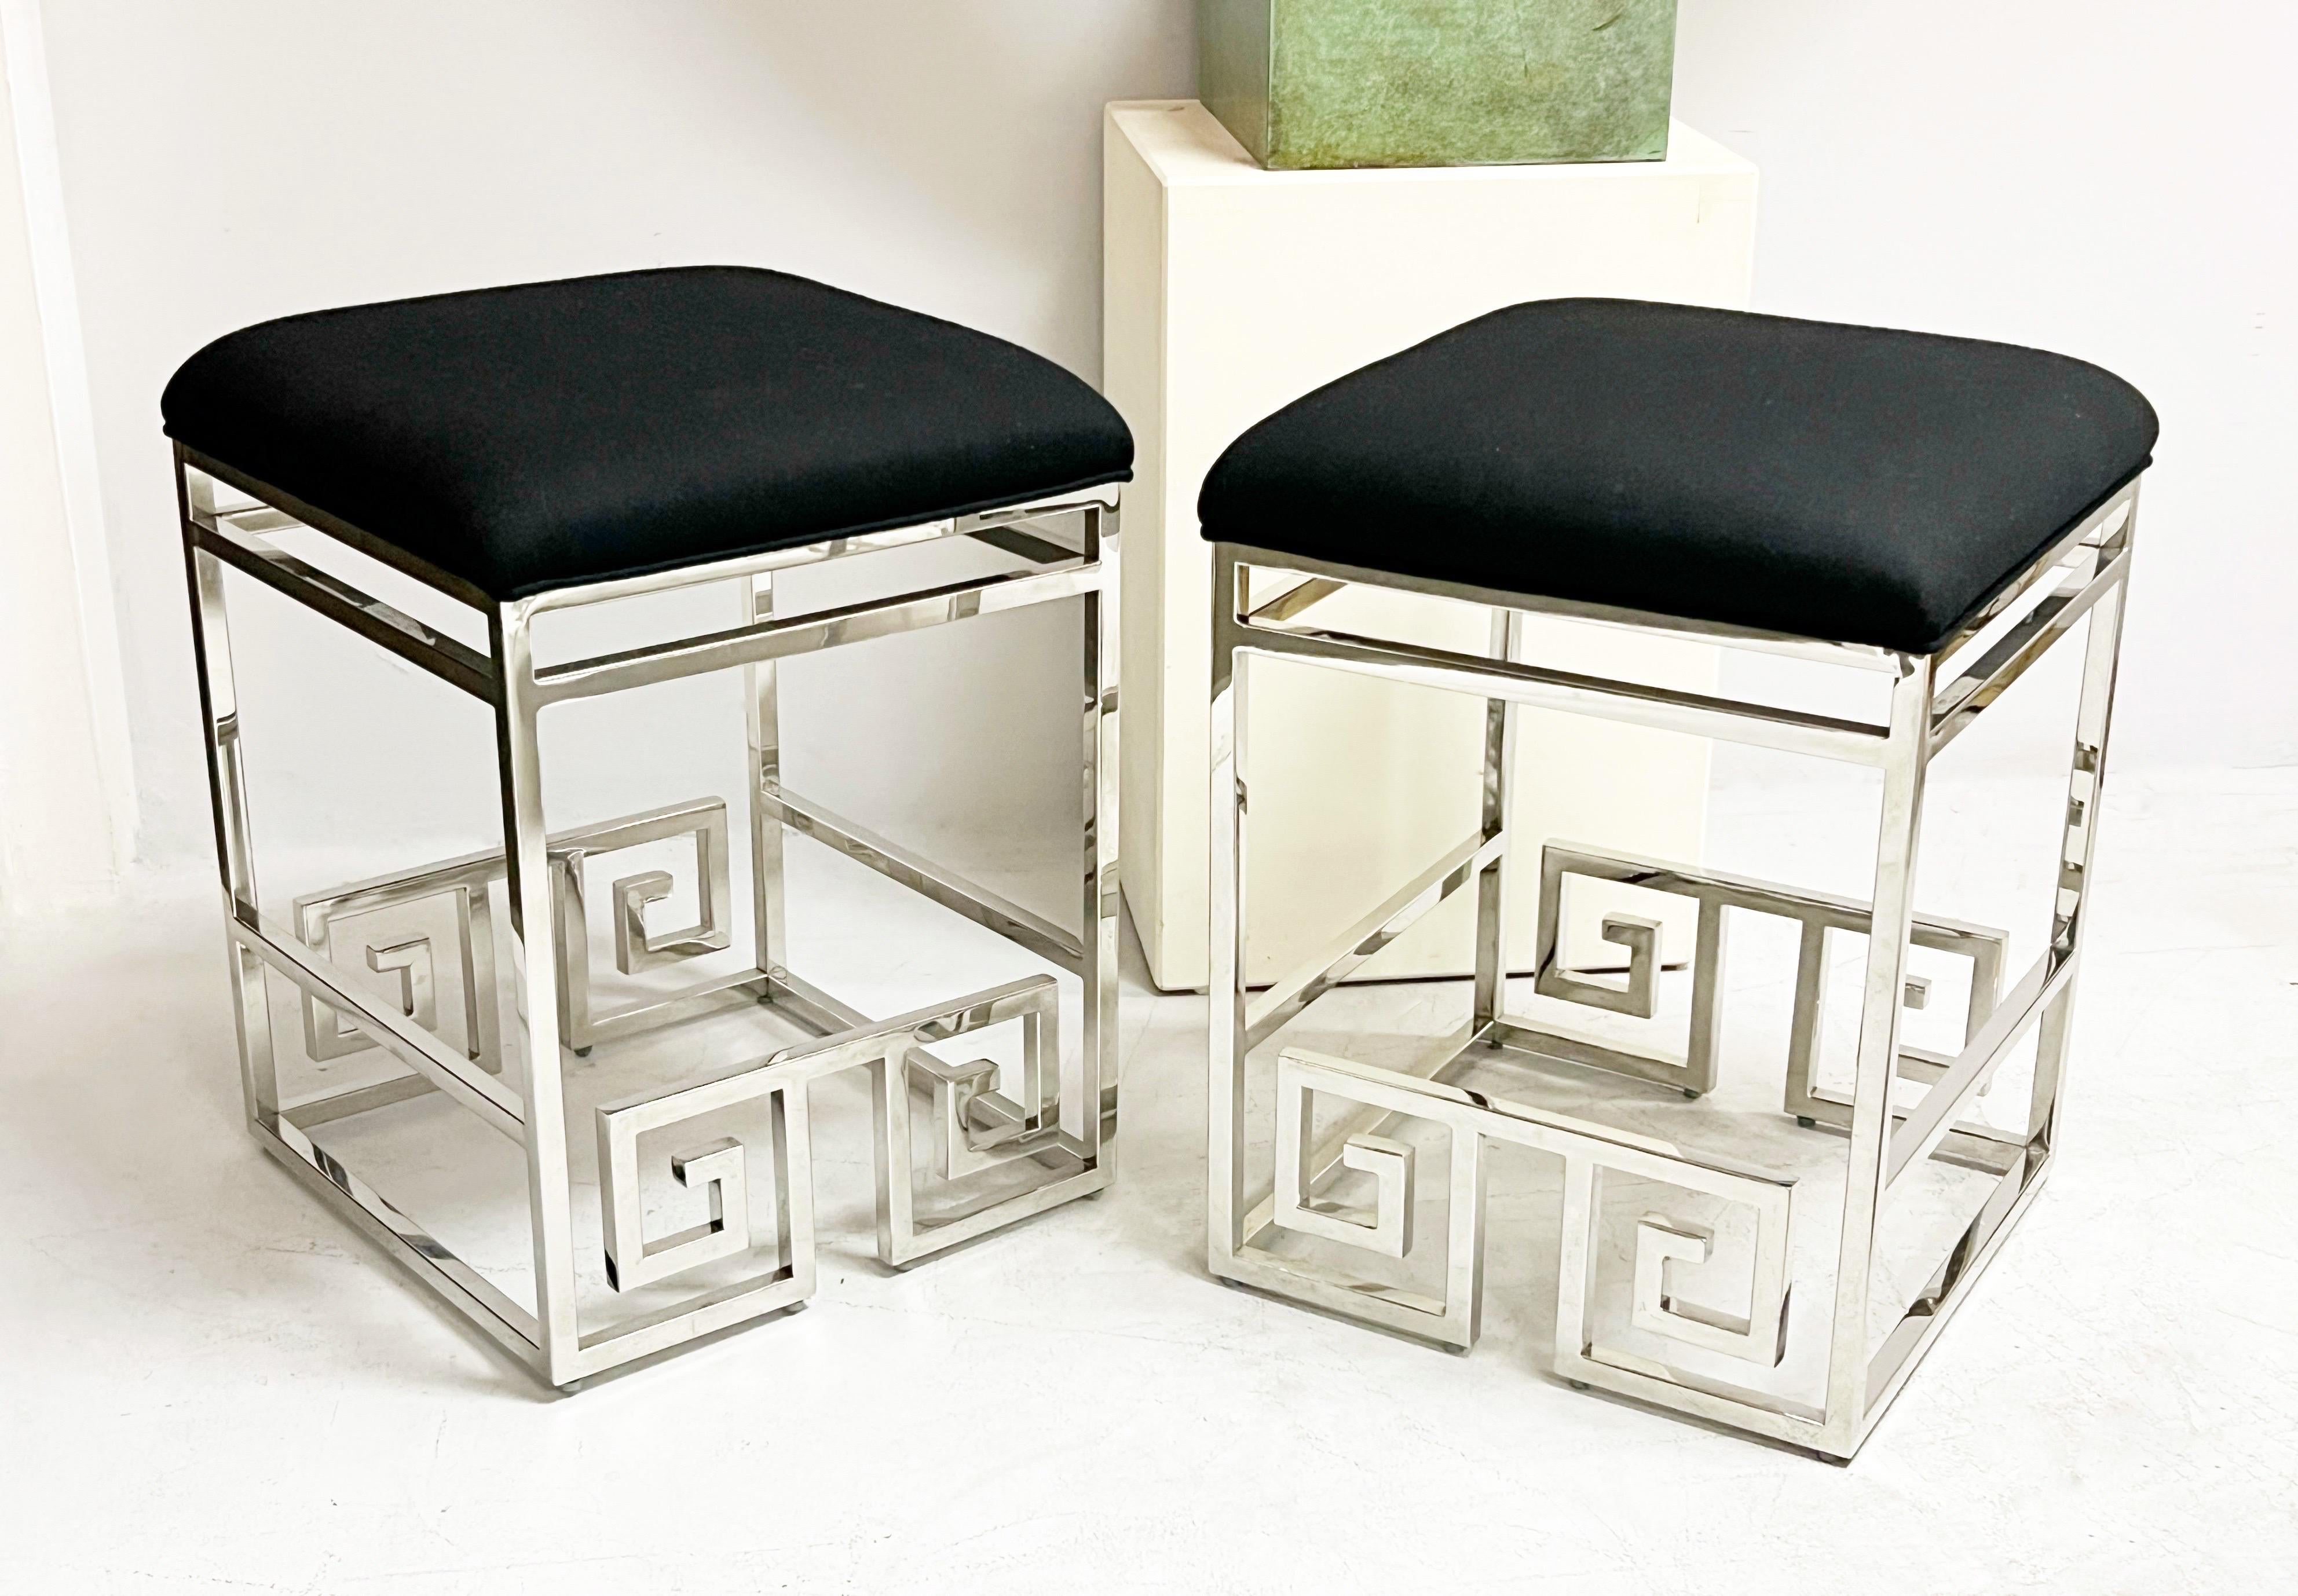 Pair of modern stools. Beautiful frames with Greek key pattern. 2 pairs available. 